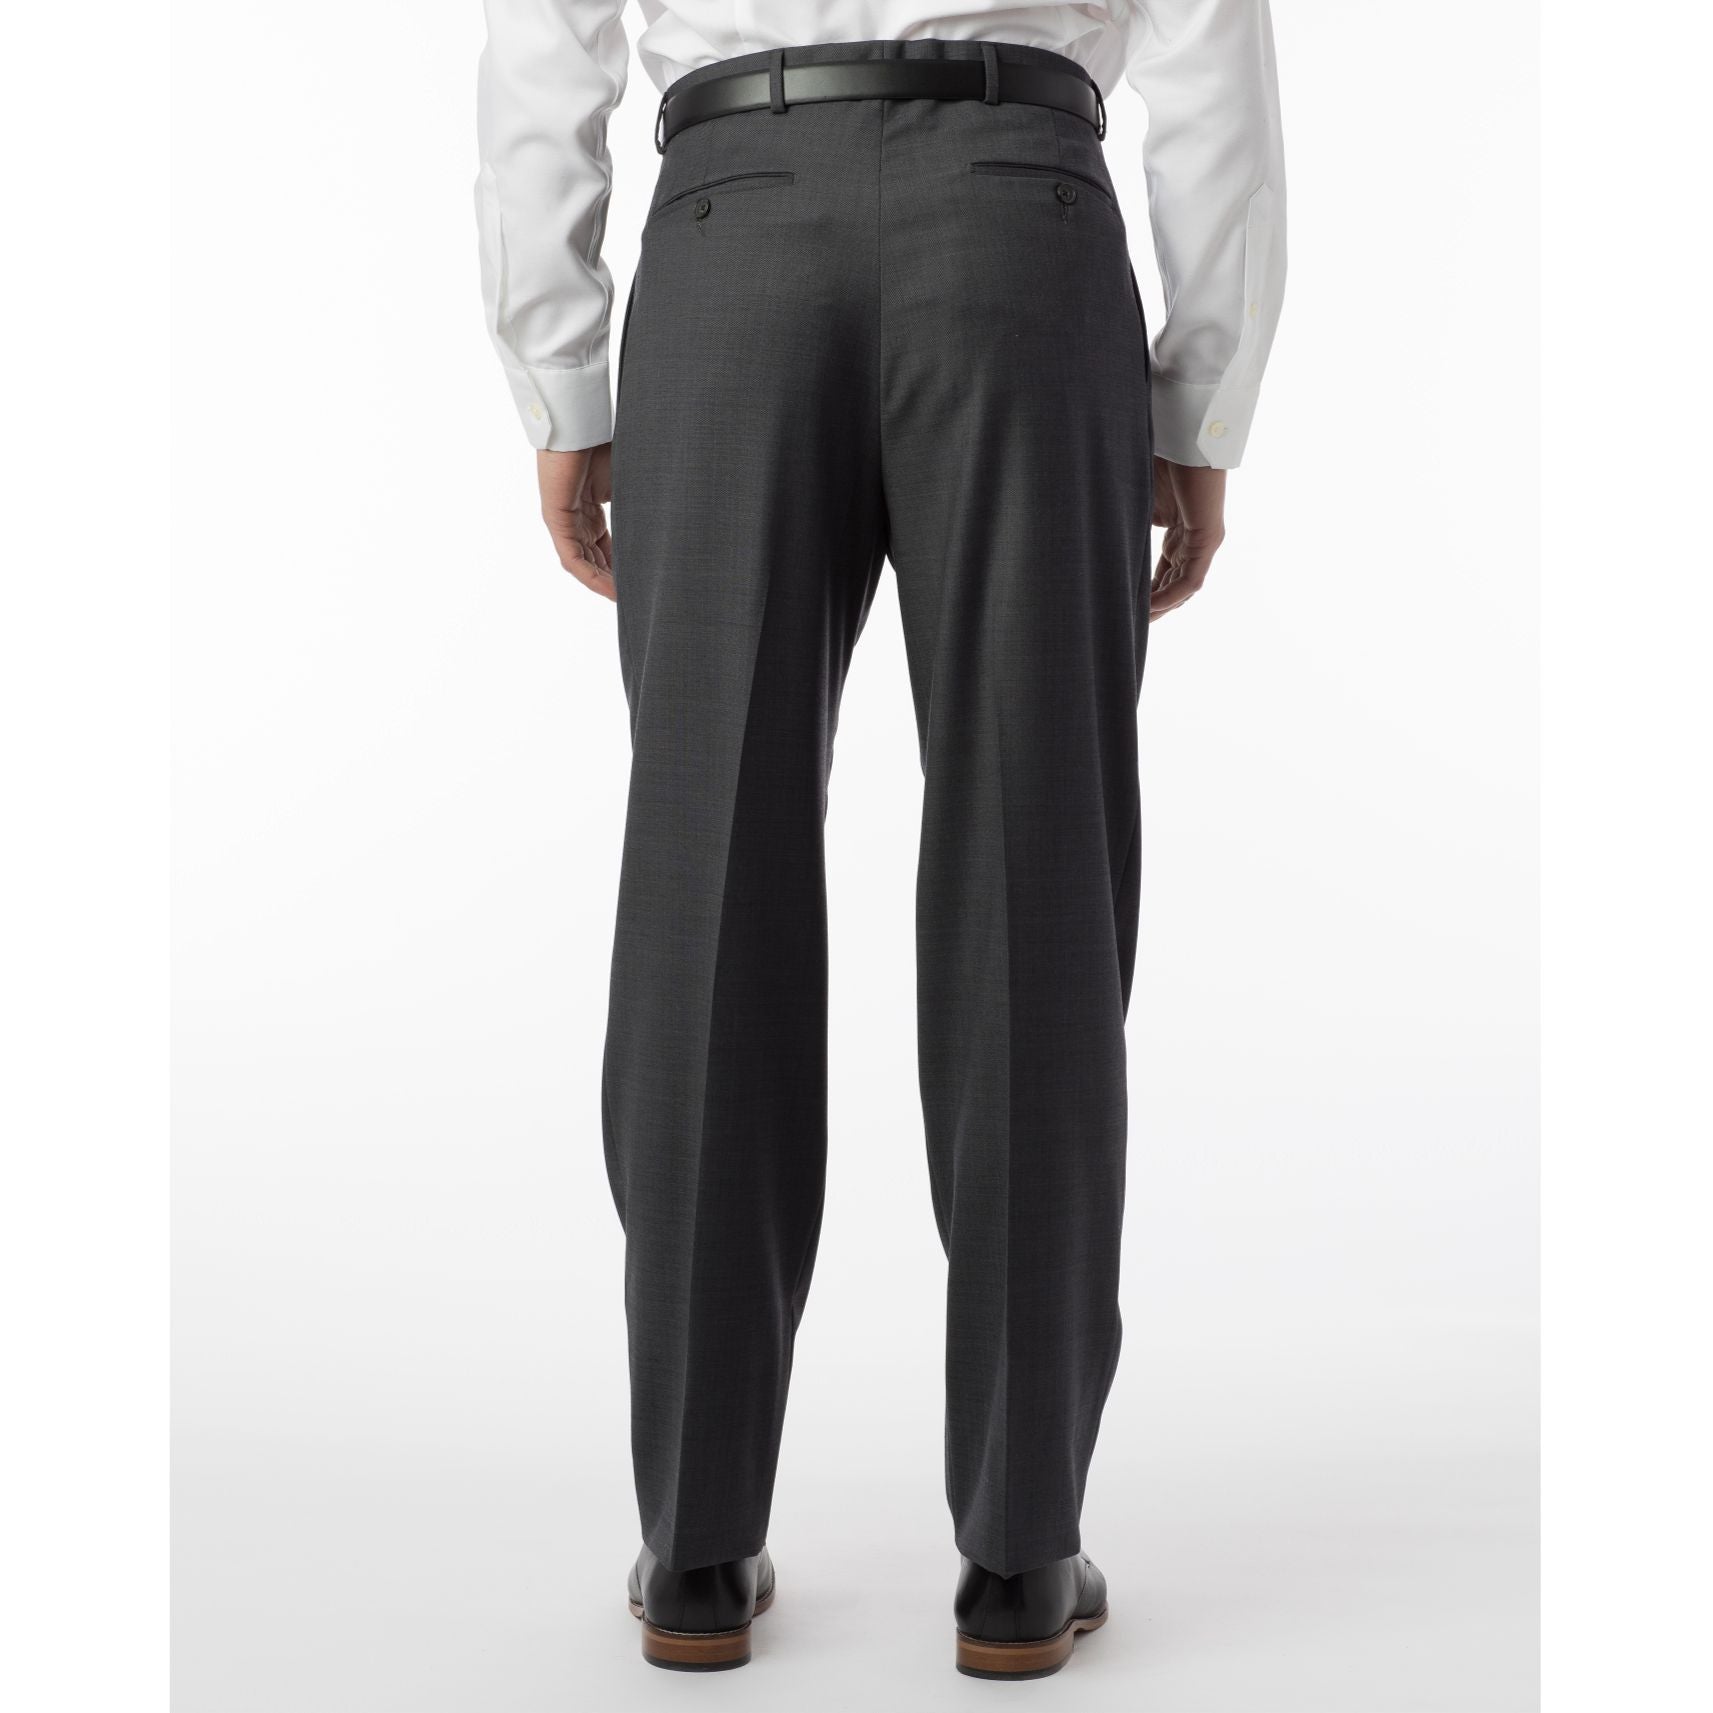 BIG FIT Sharkskin Super 120s Worsted Wool Comfort-EZE Trouser in Dark Grey (Manchester Pleated Model) by Ballin